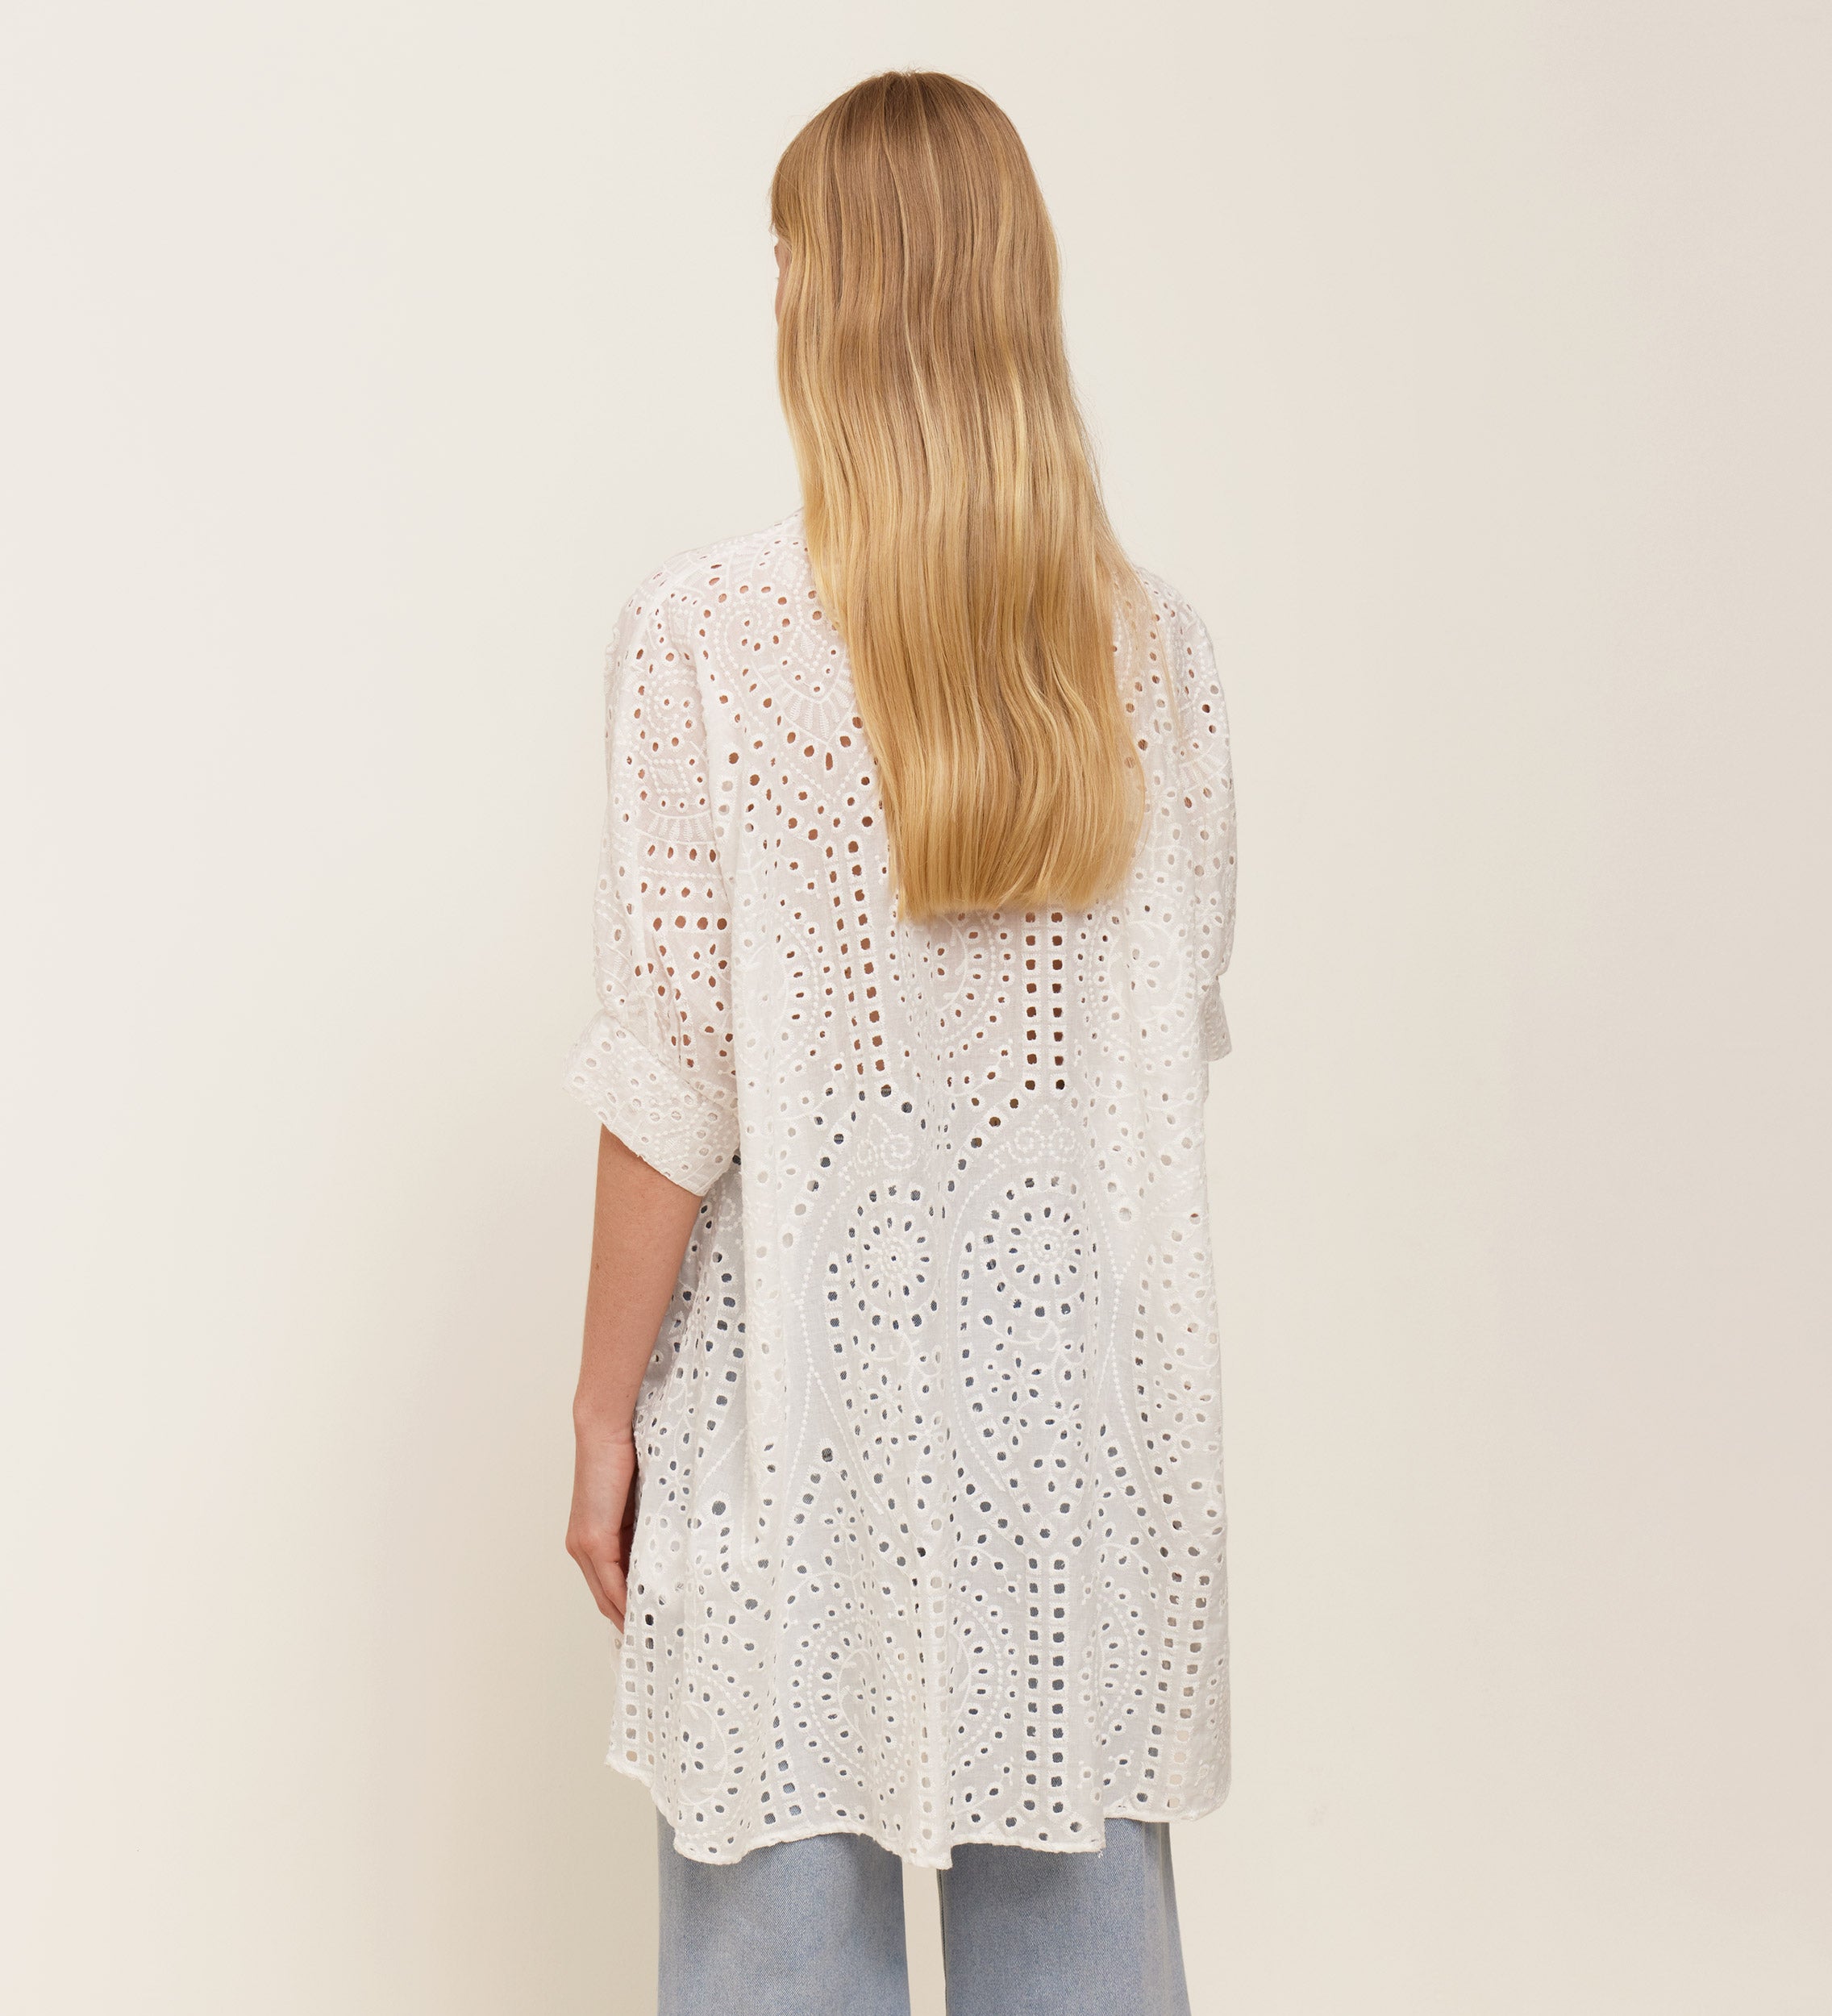 Brocaded cotton blouse